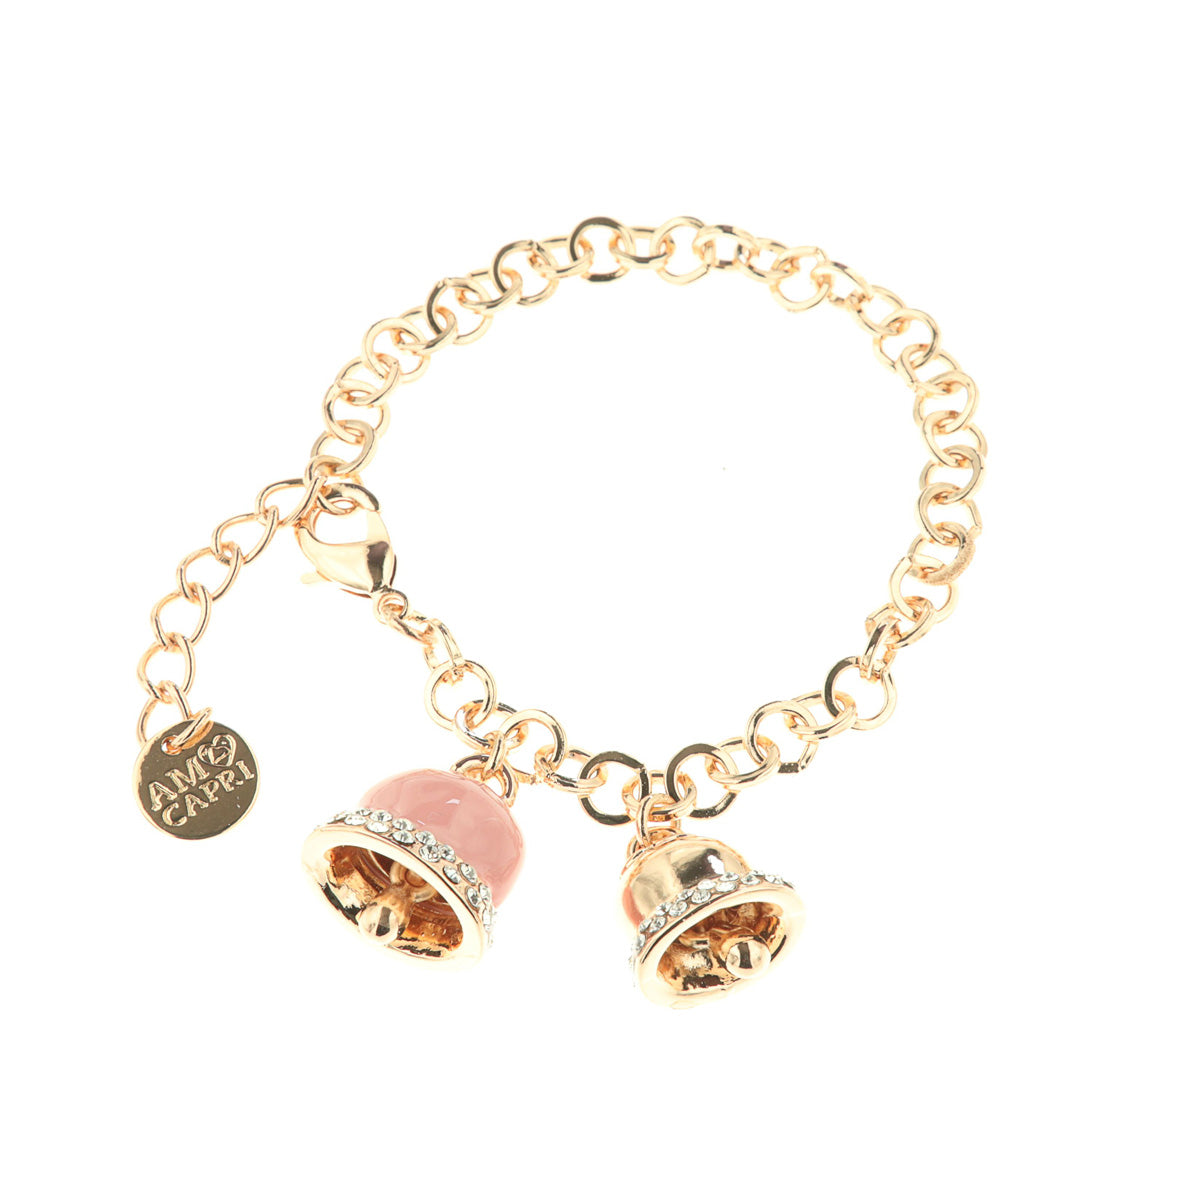 Metal bracelet with pink enamel charm and white crystals